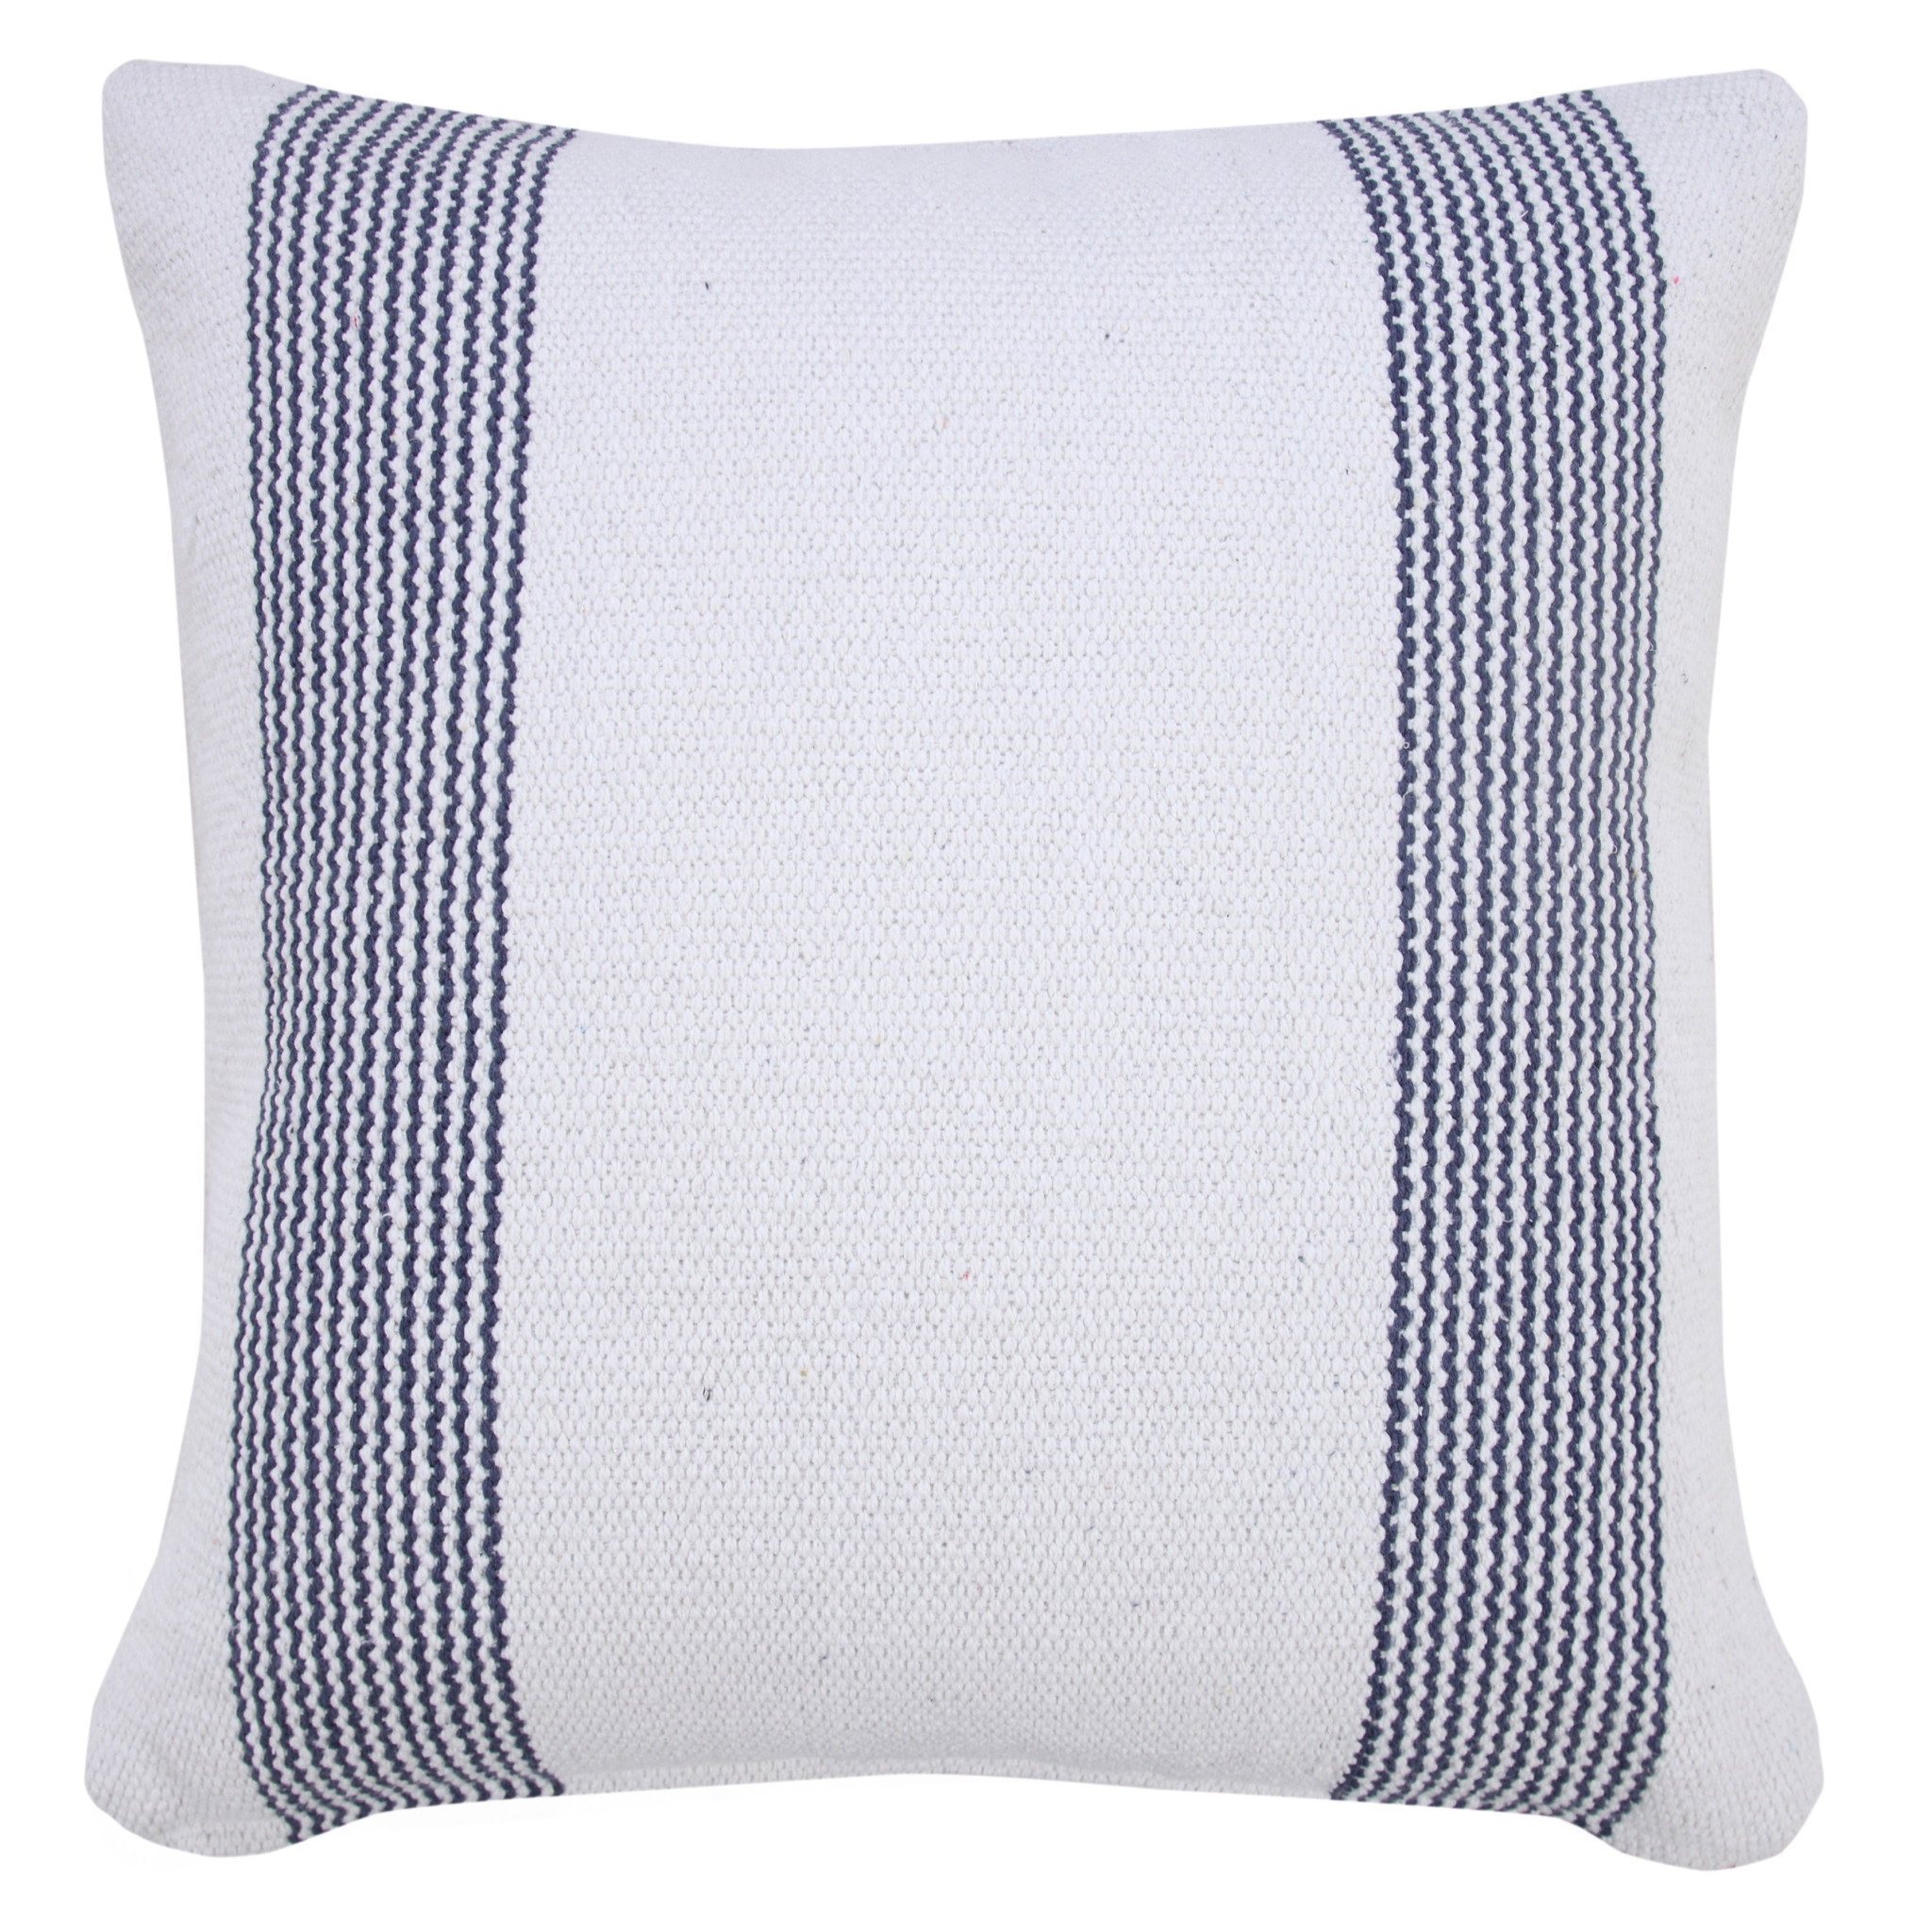 20" X 20" Pale Blue And White 100% Cotton Geometric Zippered Pillow-516713-1